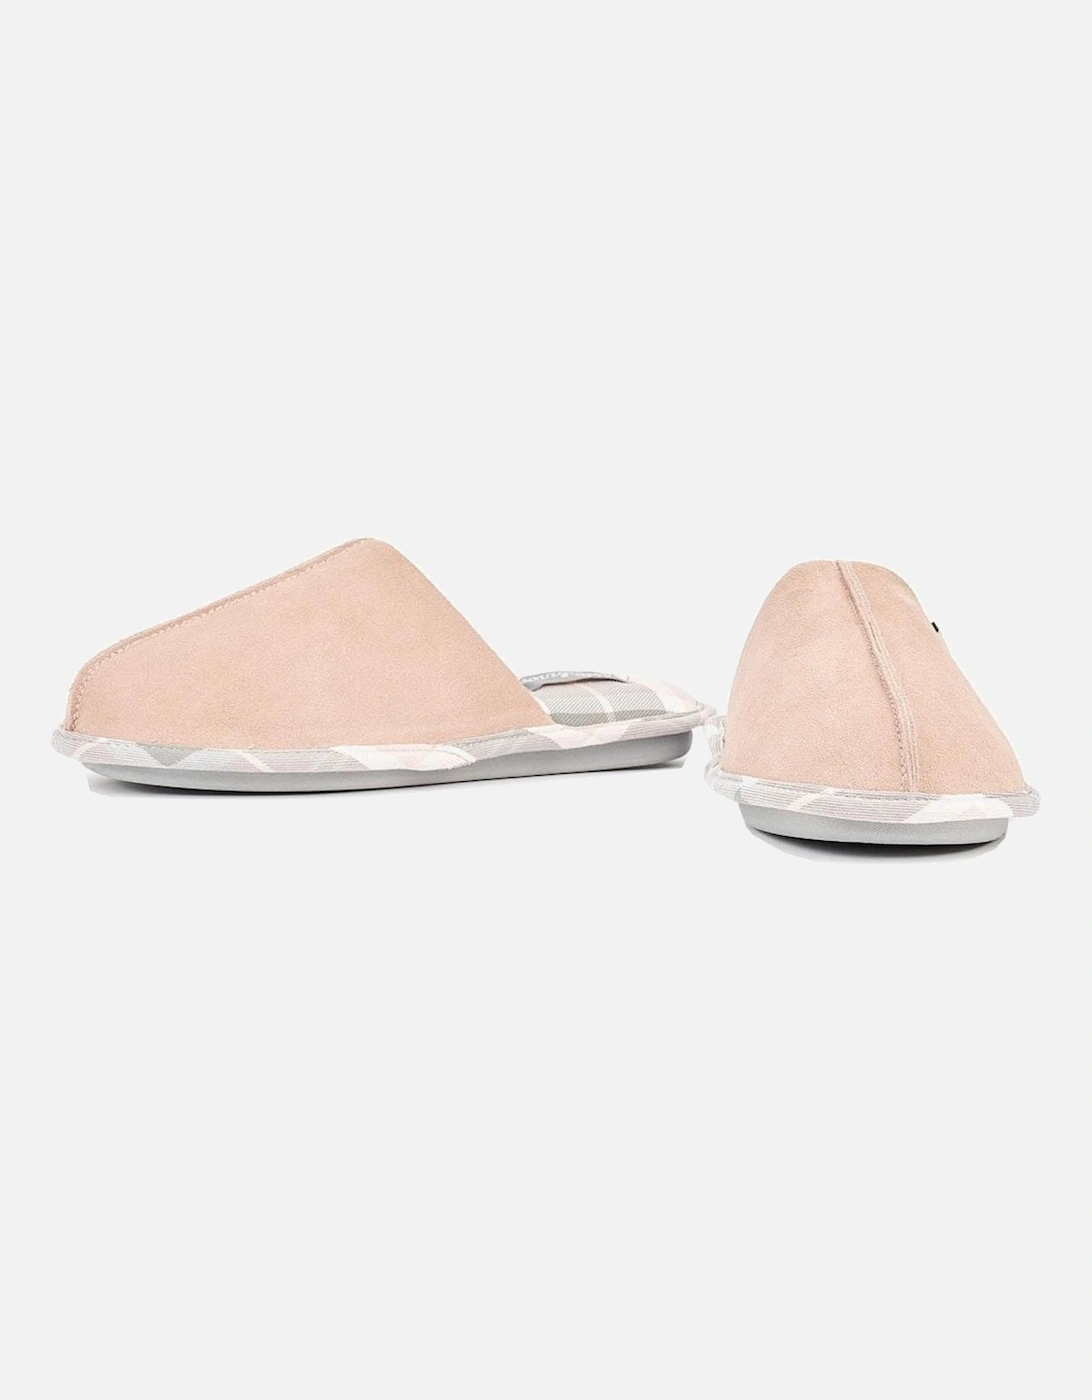 Women's Pink Barbour Simone Slippers.